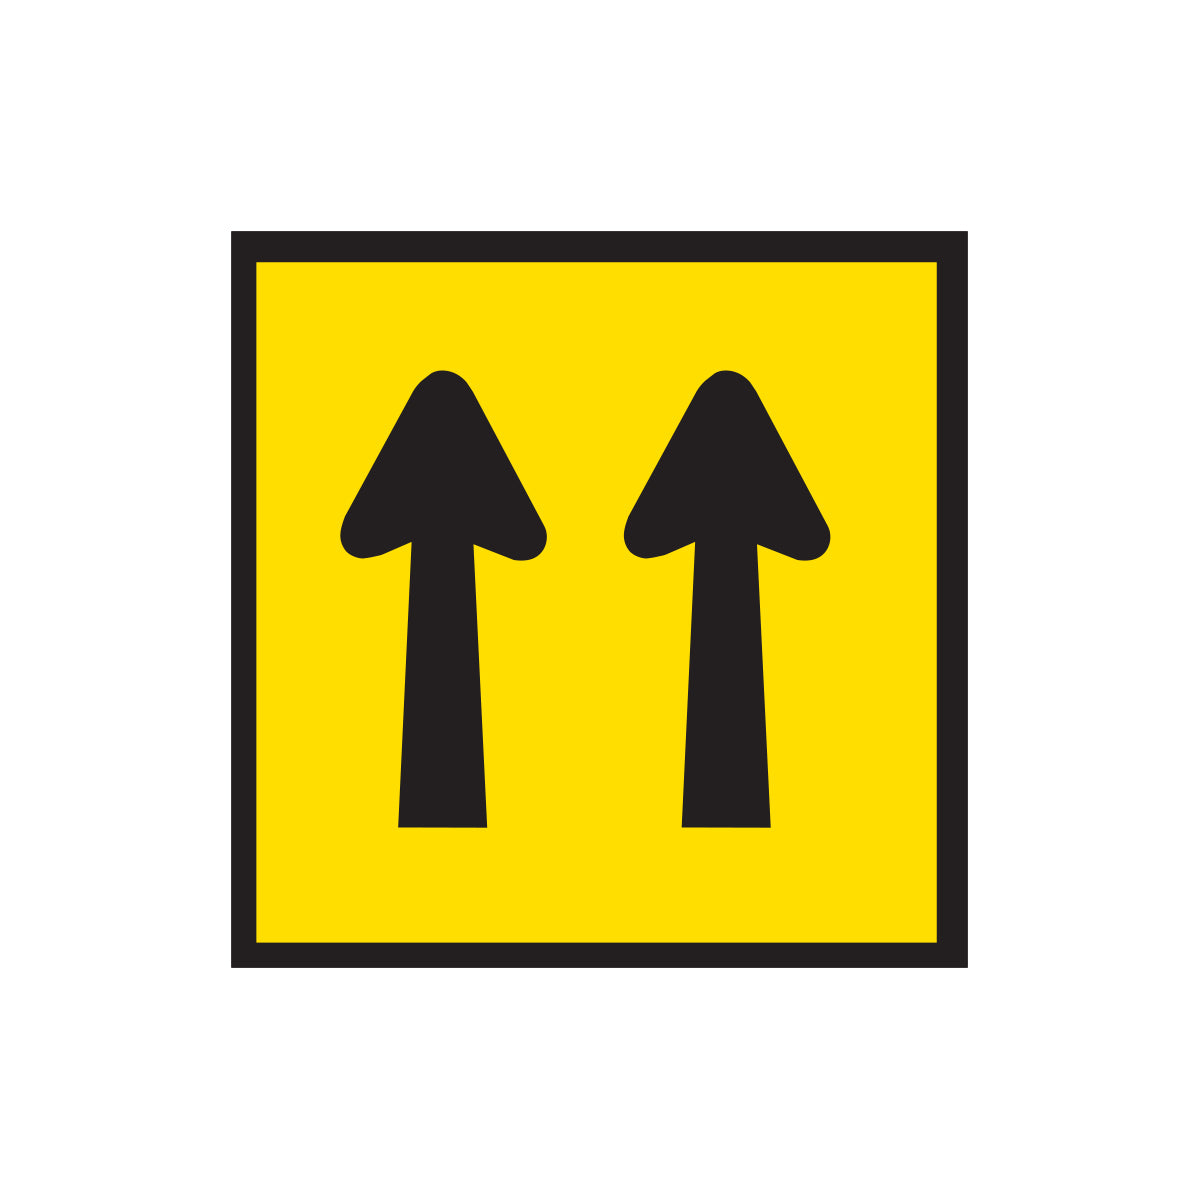 Multi-Message Traffic Signs